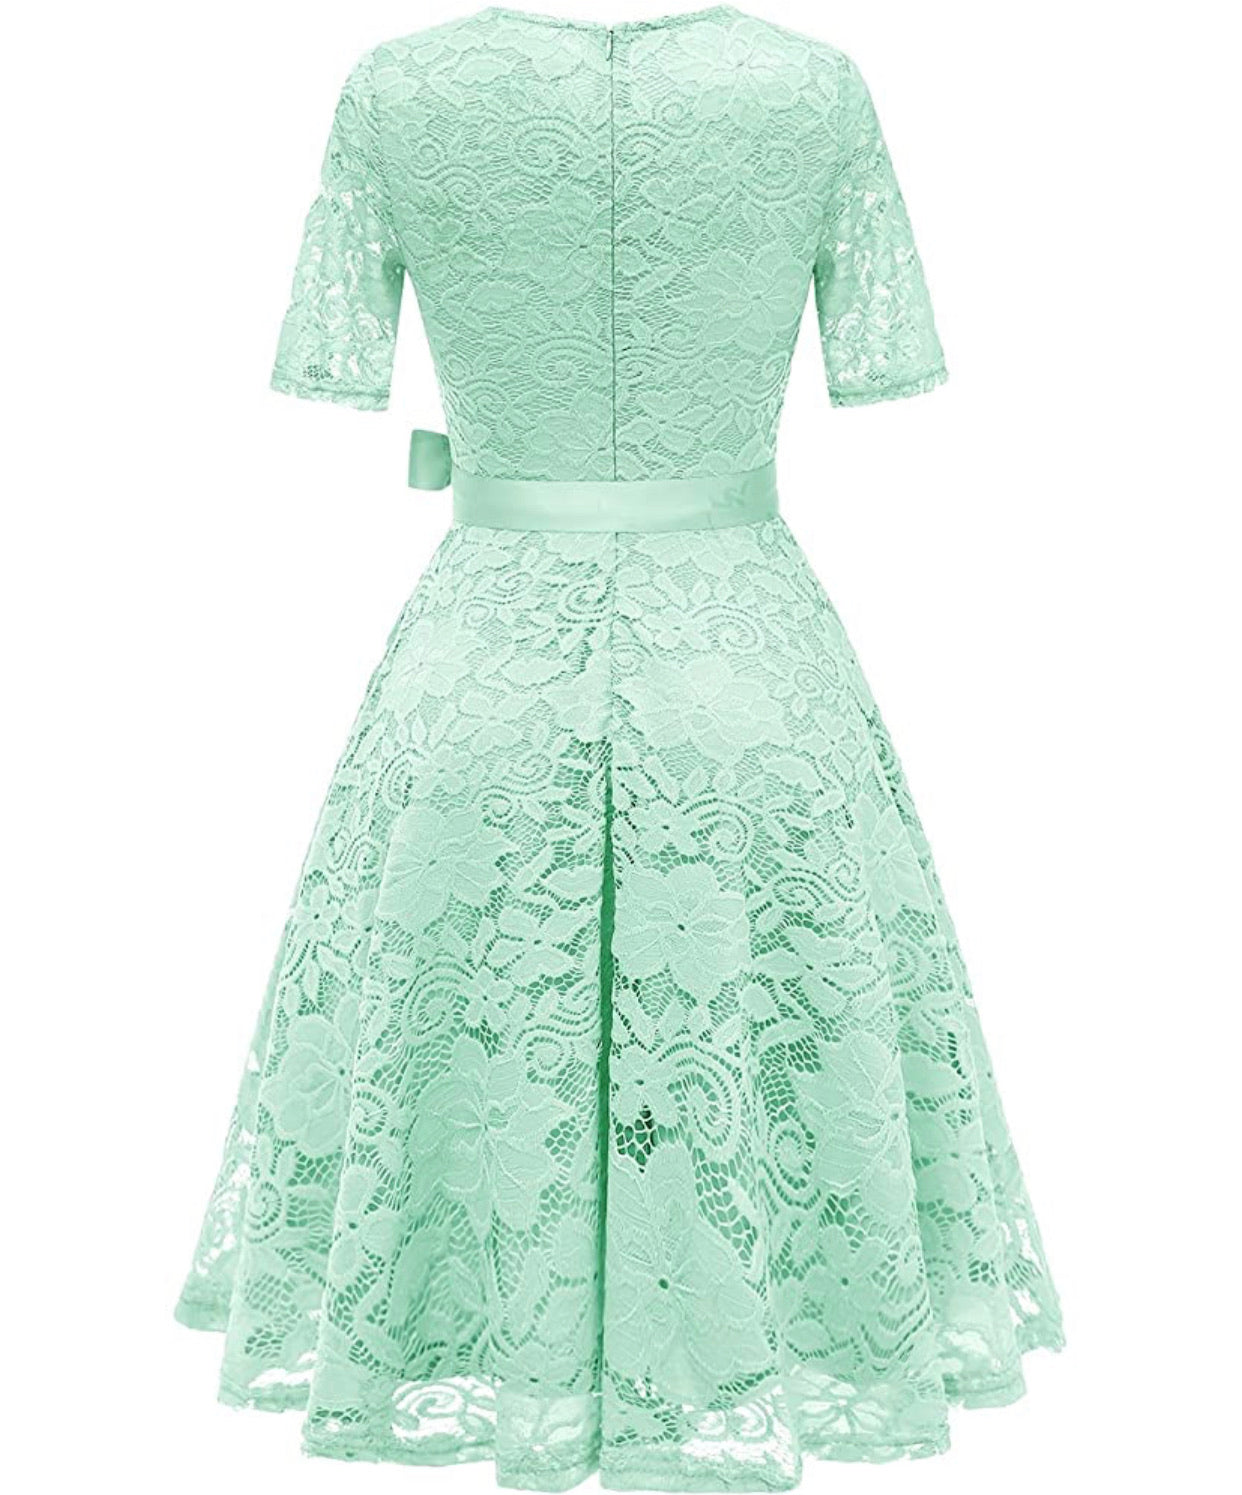 Vintage Inspired Full Lace Cocktail Dress, Sizes Small - 3XLarge (Mint)